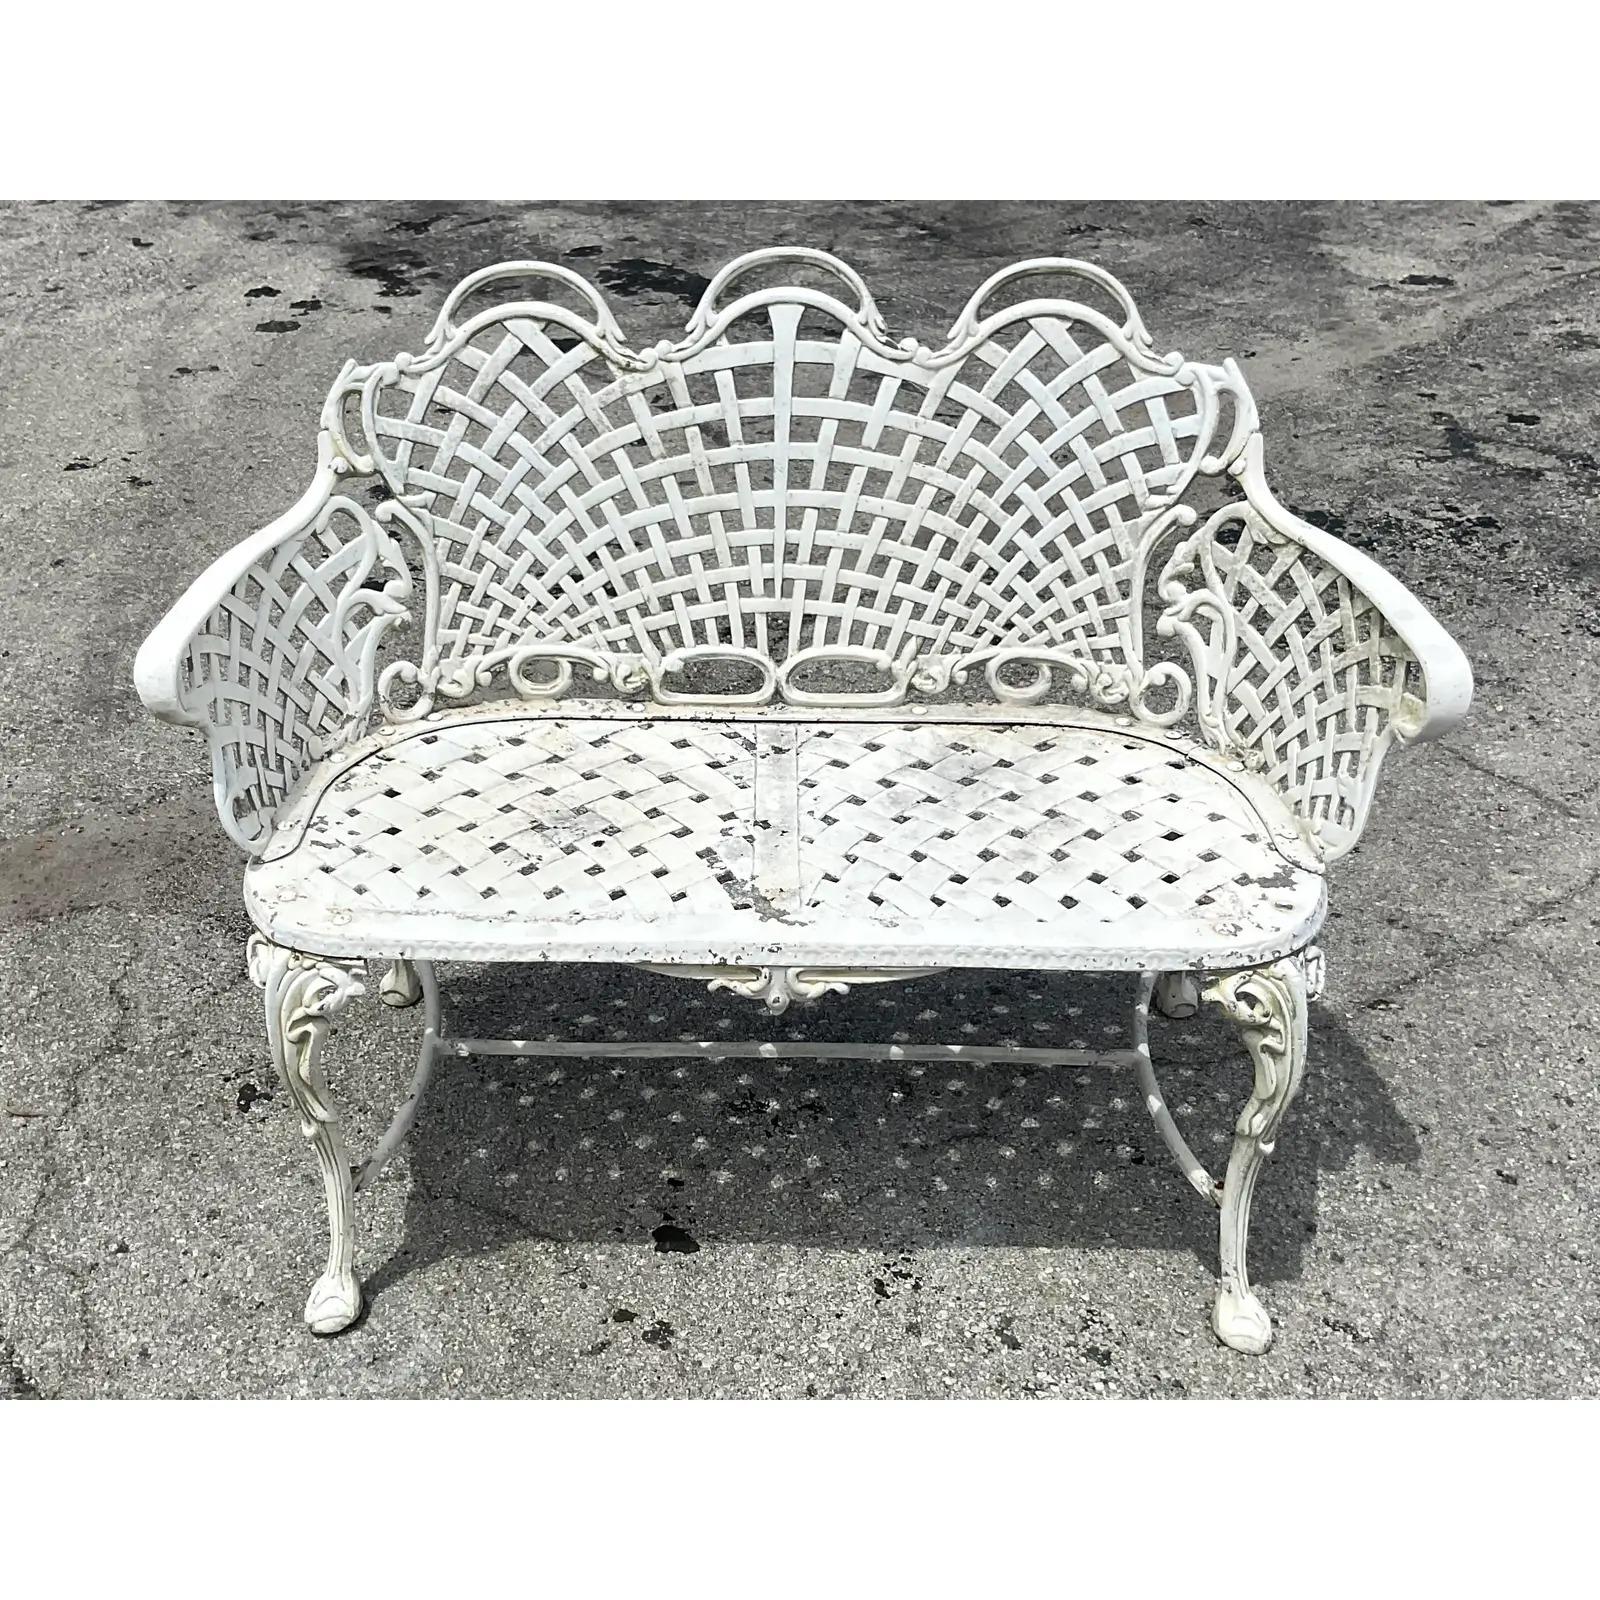 North American Vintage Regency Web Wrought Iron Bench For Sale